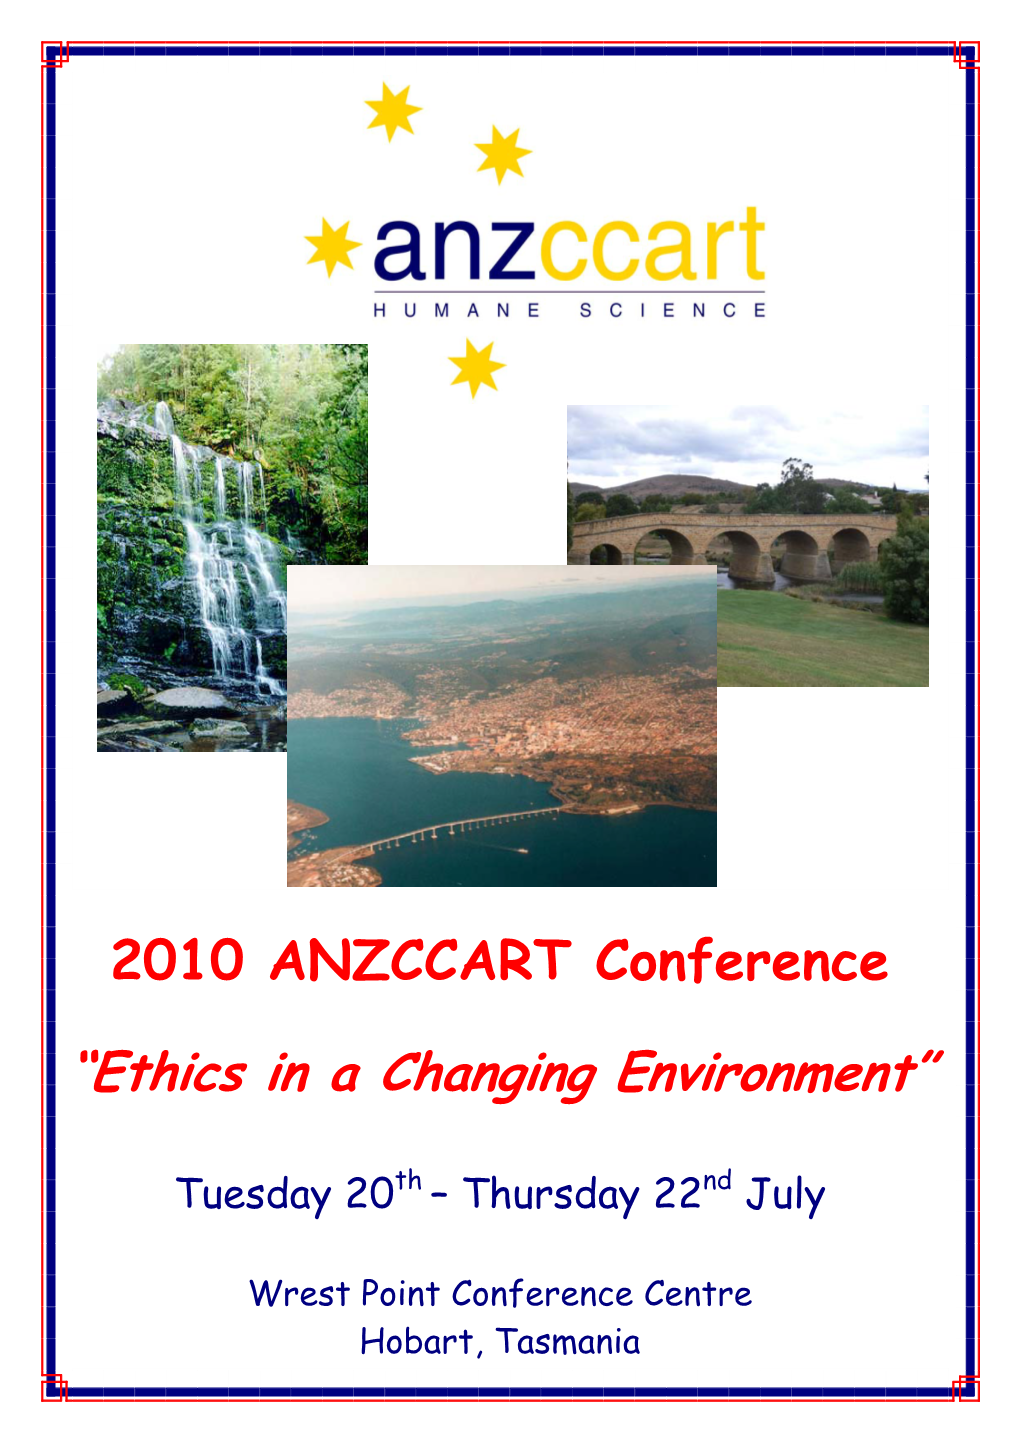 2010 ANZCCART Conference “Ethics in a Changing Environment”